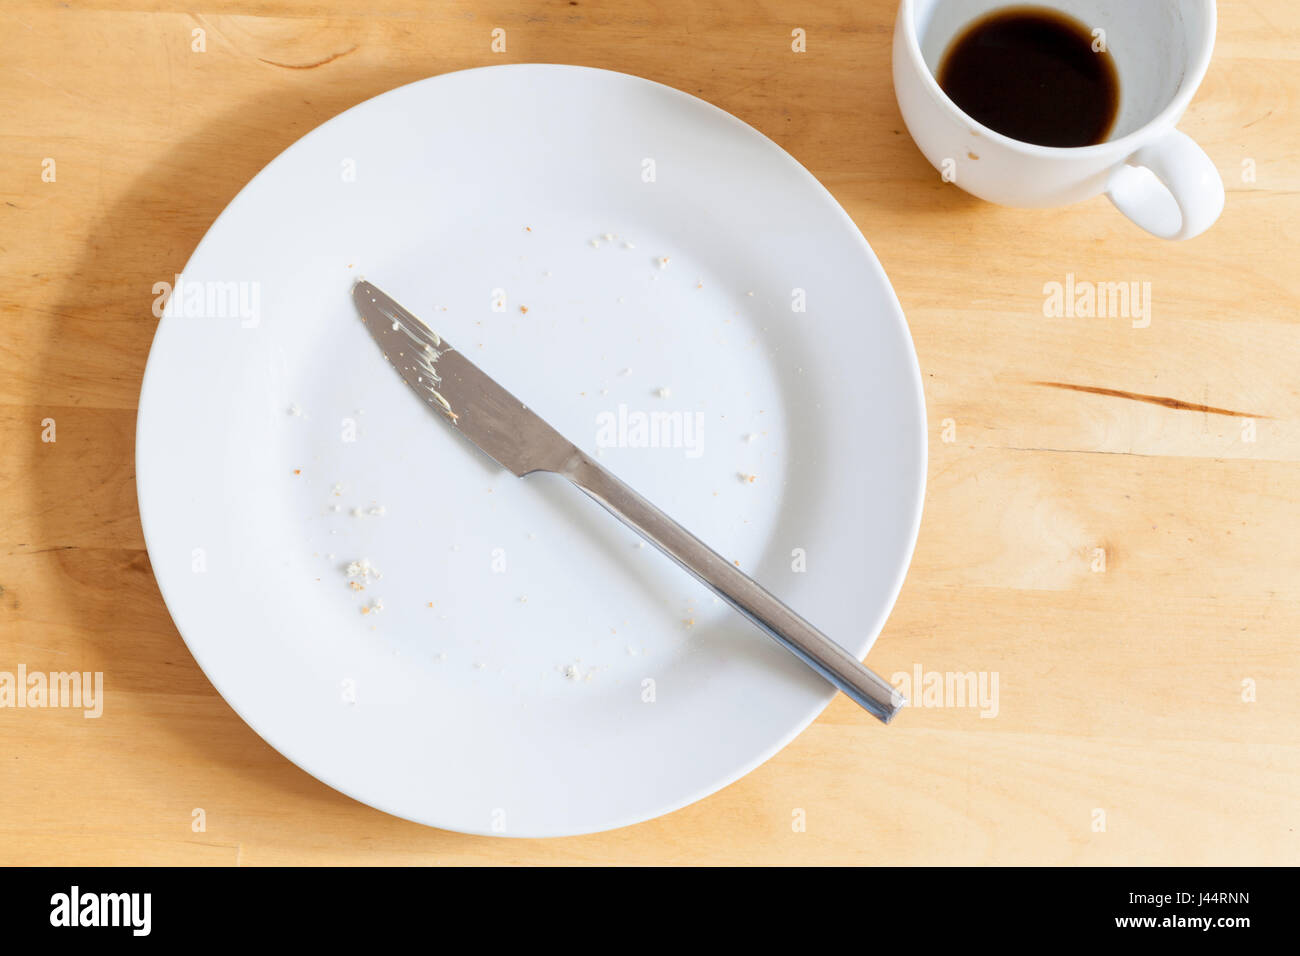 Finished eating. Leftovers; a plate with crumbs, a used knife and empty coffee cup after breakfast or mid morning snack Stock Photo